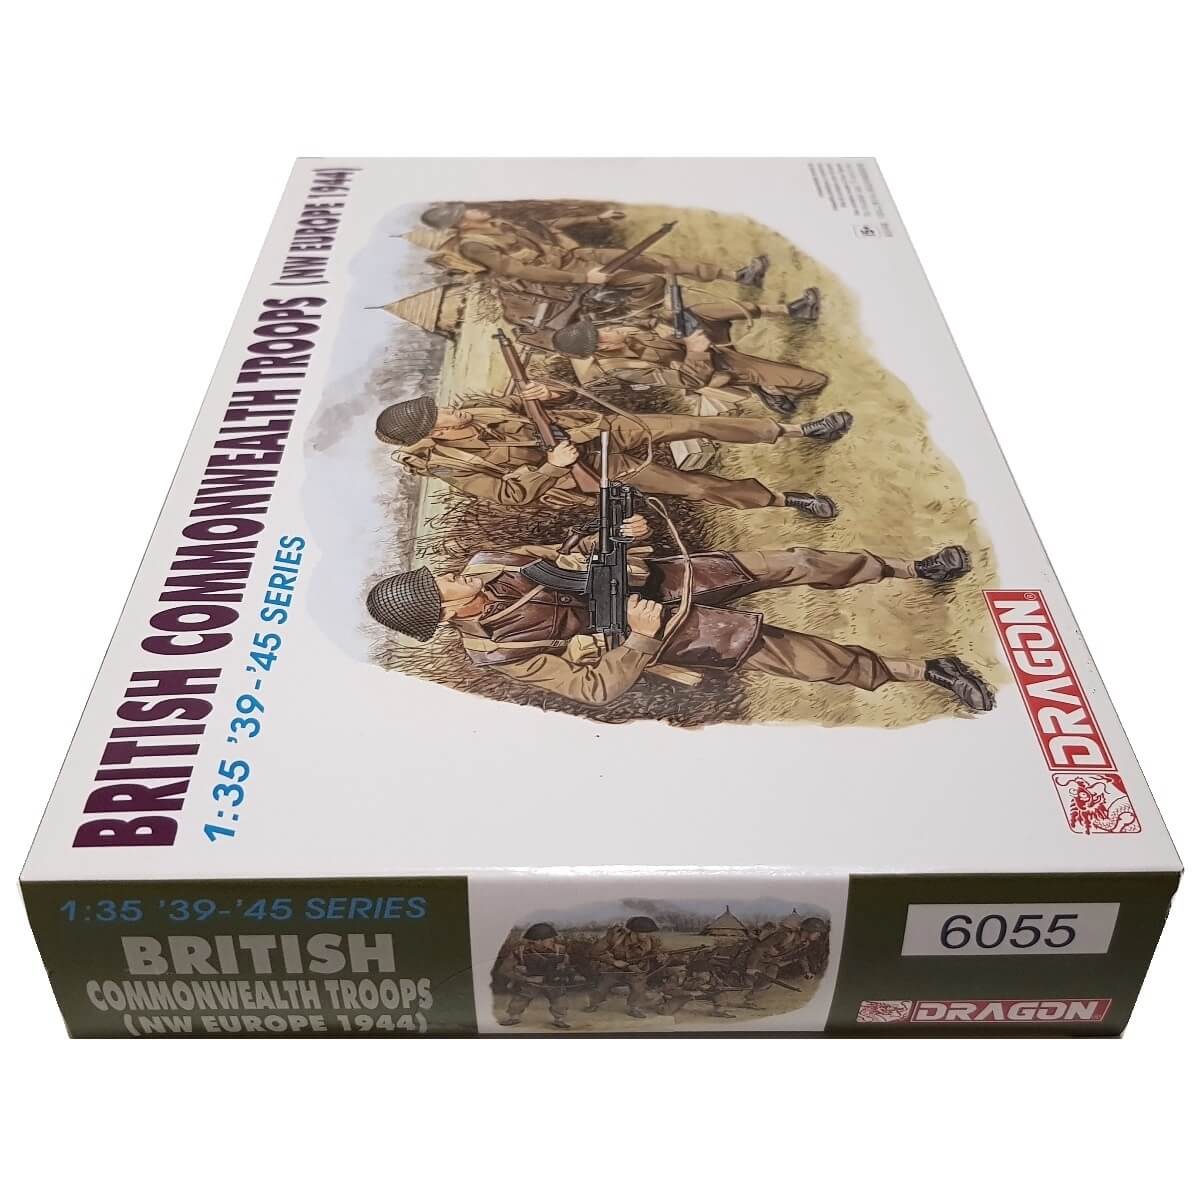 1:35 British Commonwealth Troops - NW Europe 1944 - DRAGON